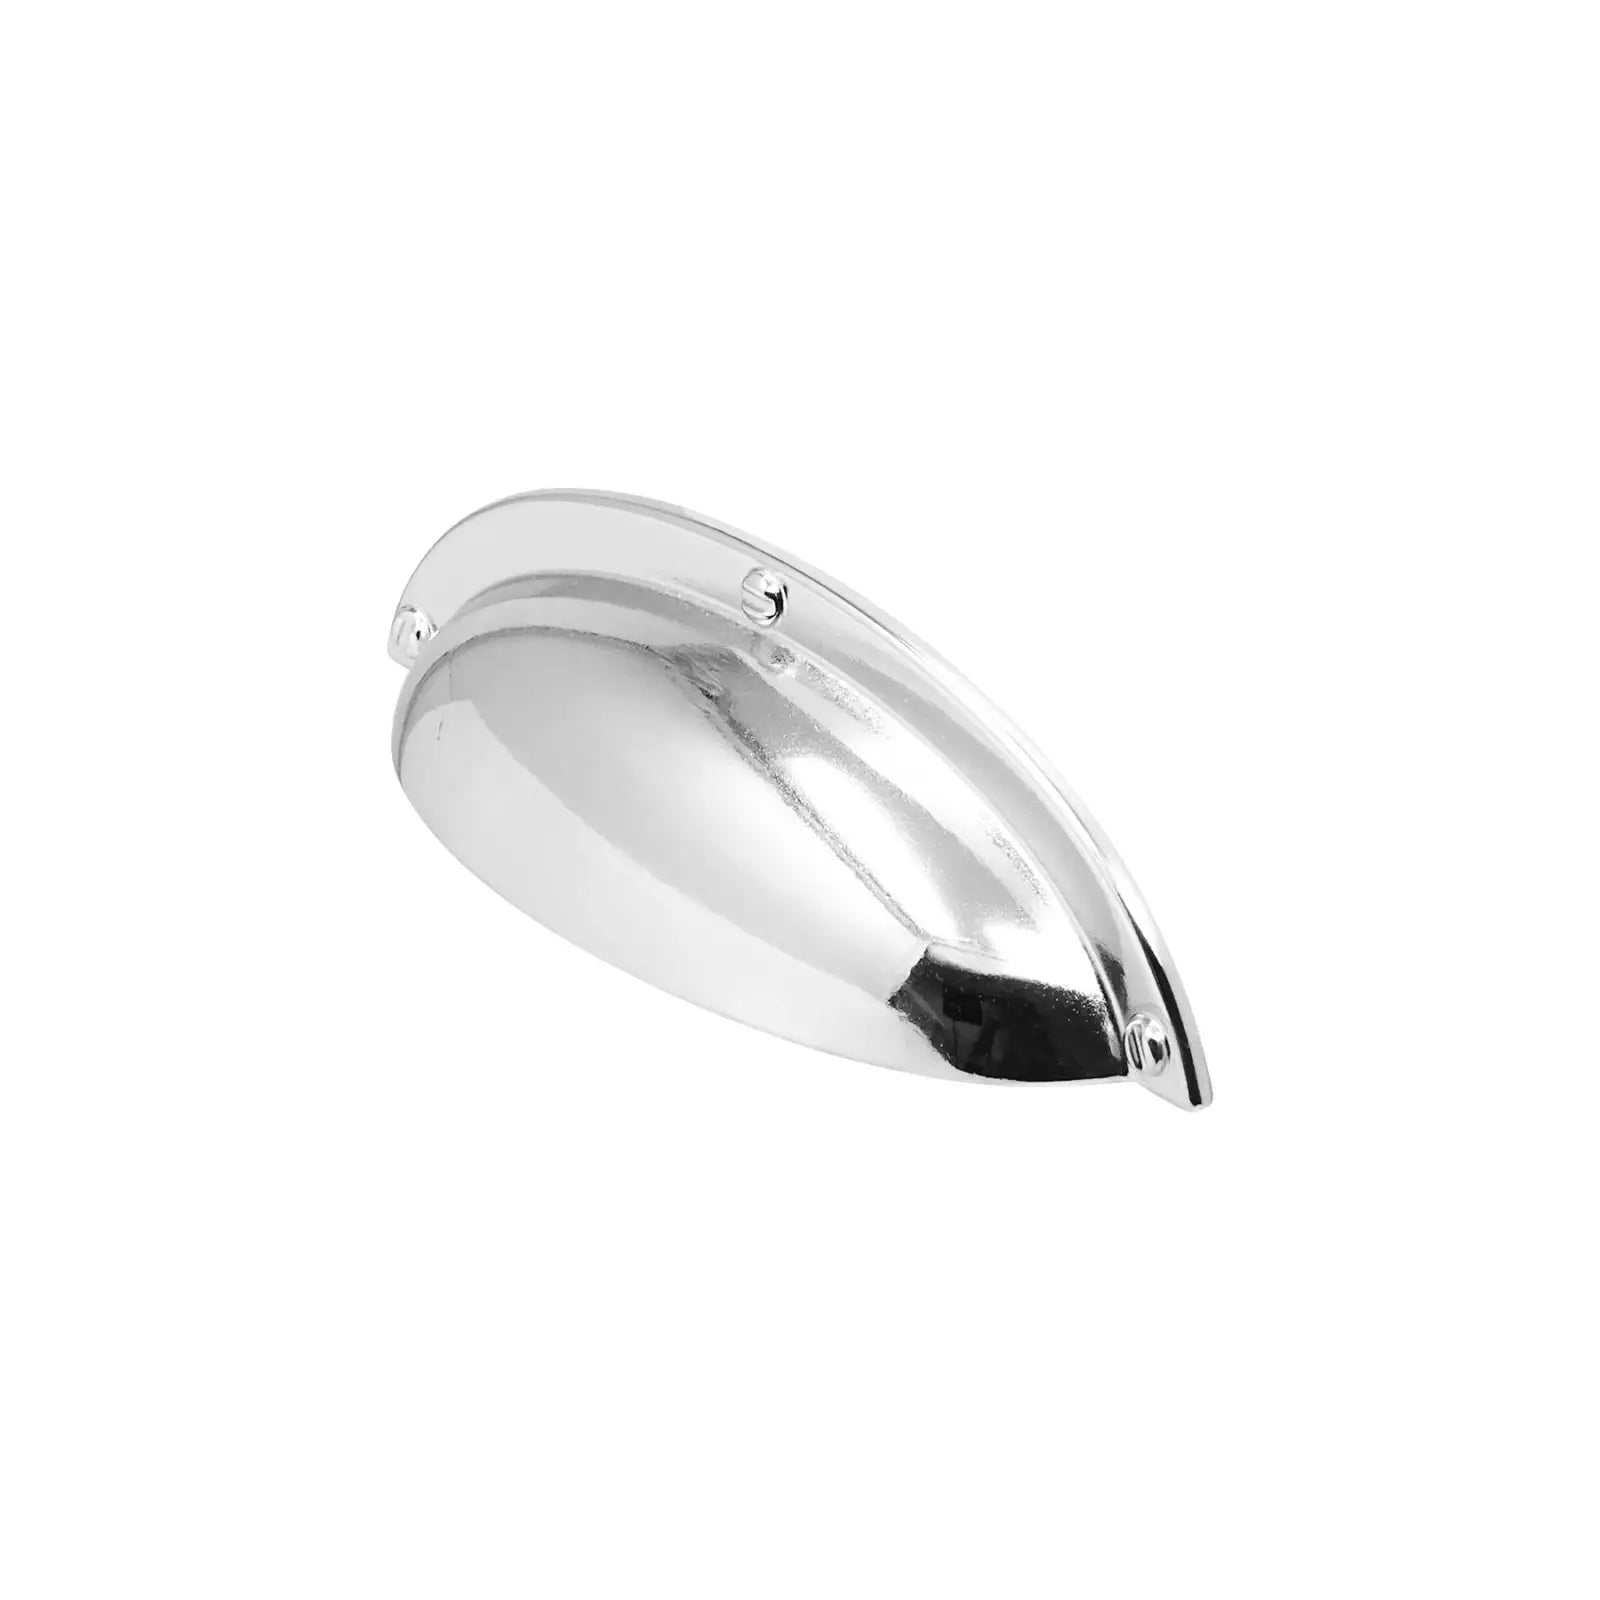 Manna - Kitchen Cabinet Cup Handle - Polished Chrome - Decor And Decor